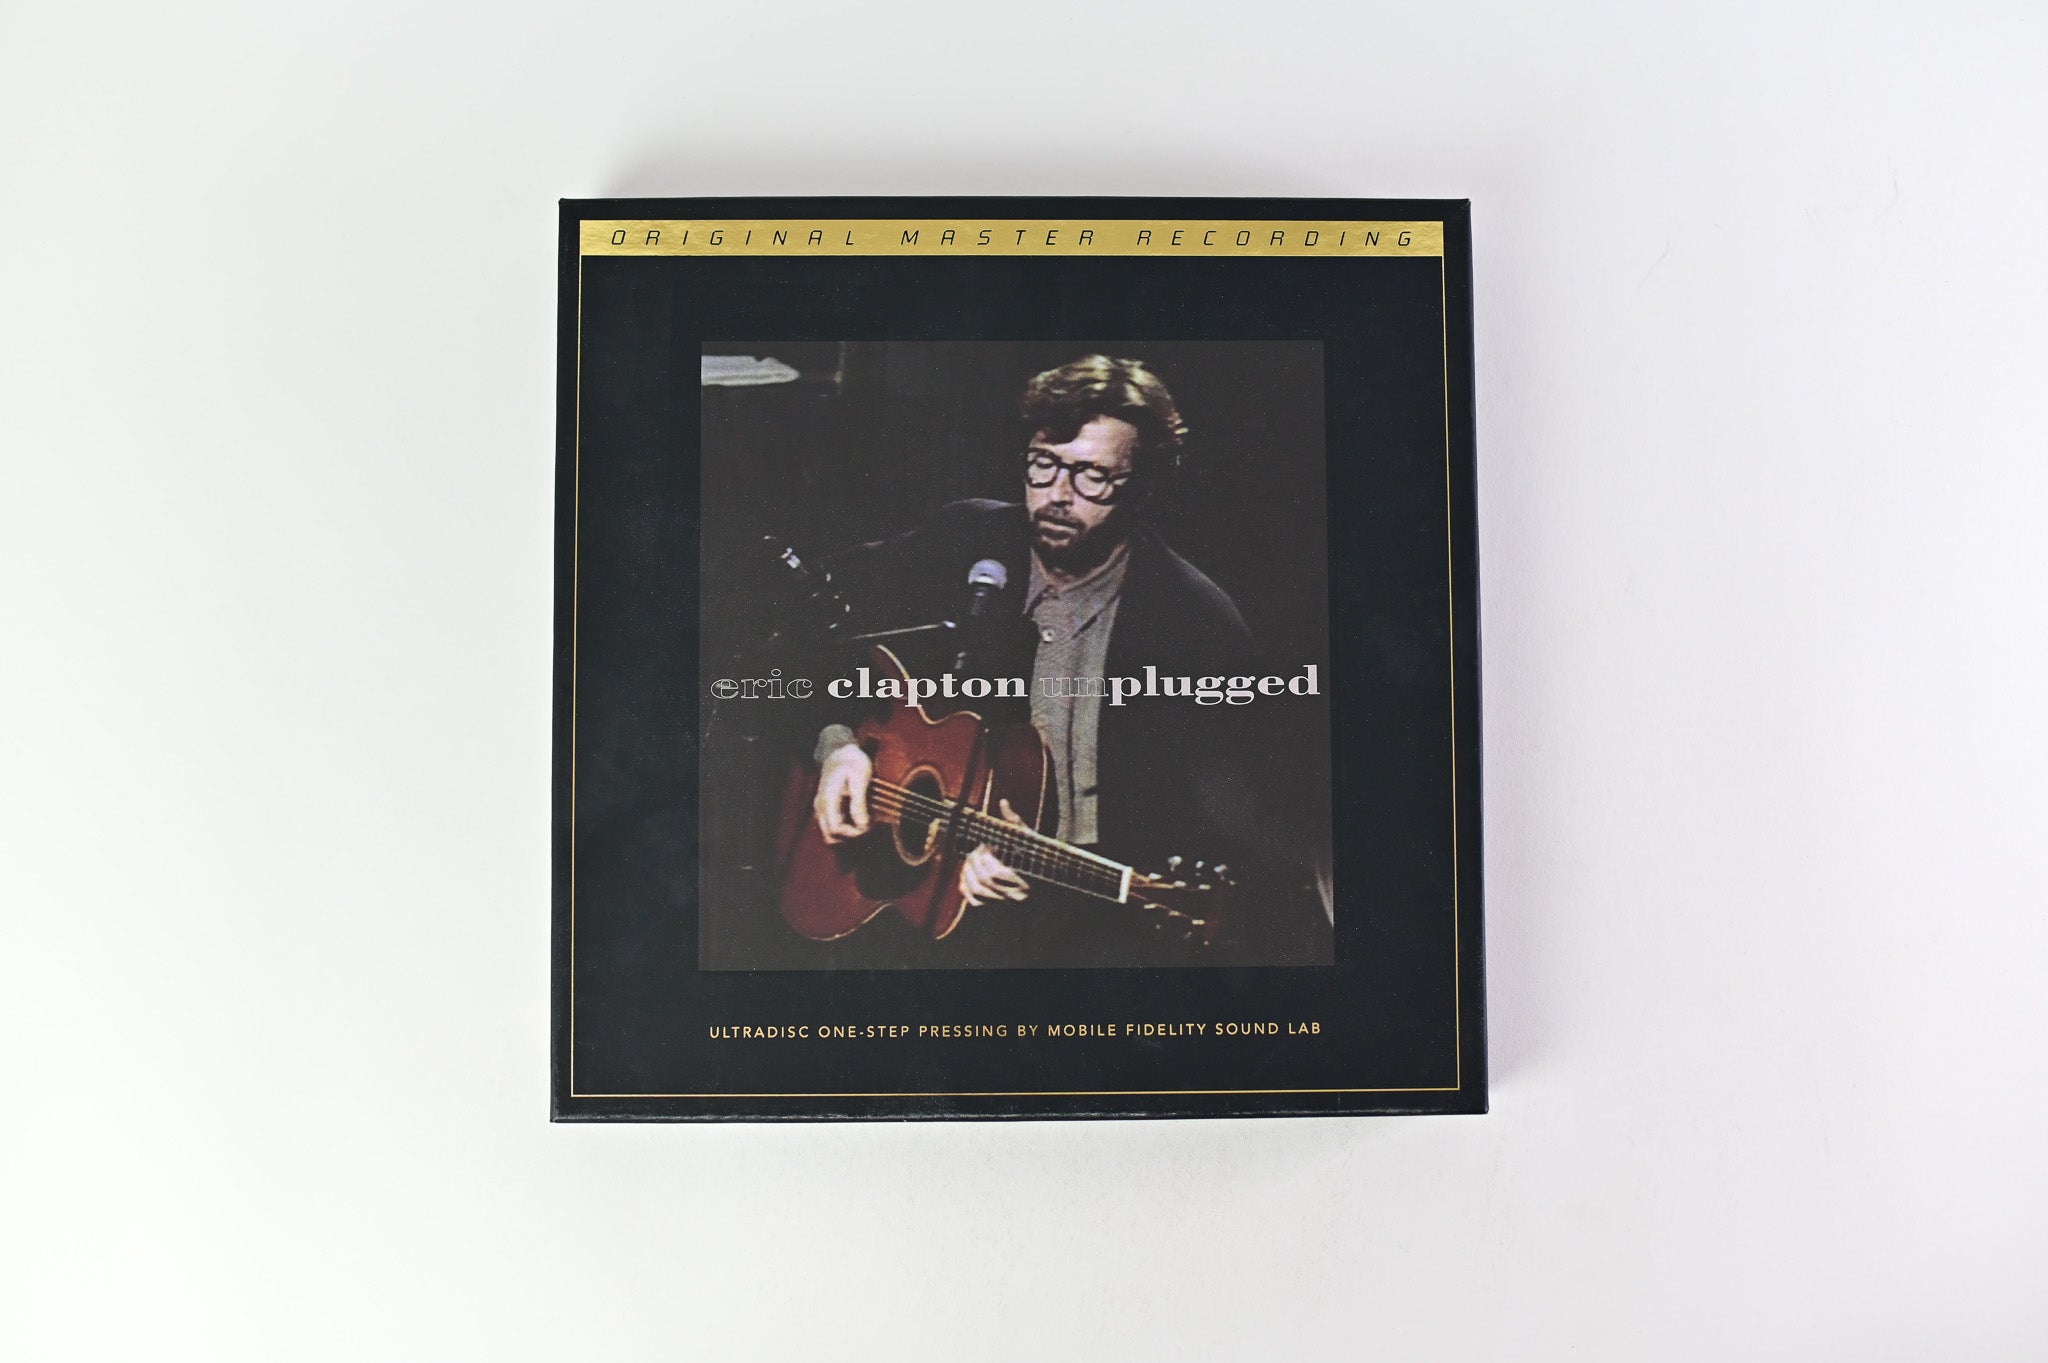 Eric Clapton - Unplugged on Mobile Fidelity Sound Lab 45 RPM Ltd Numbered 180g SuperVinyl Reissue